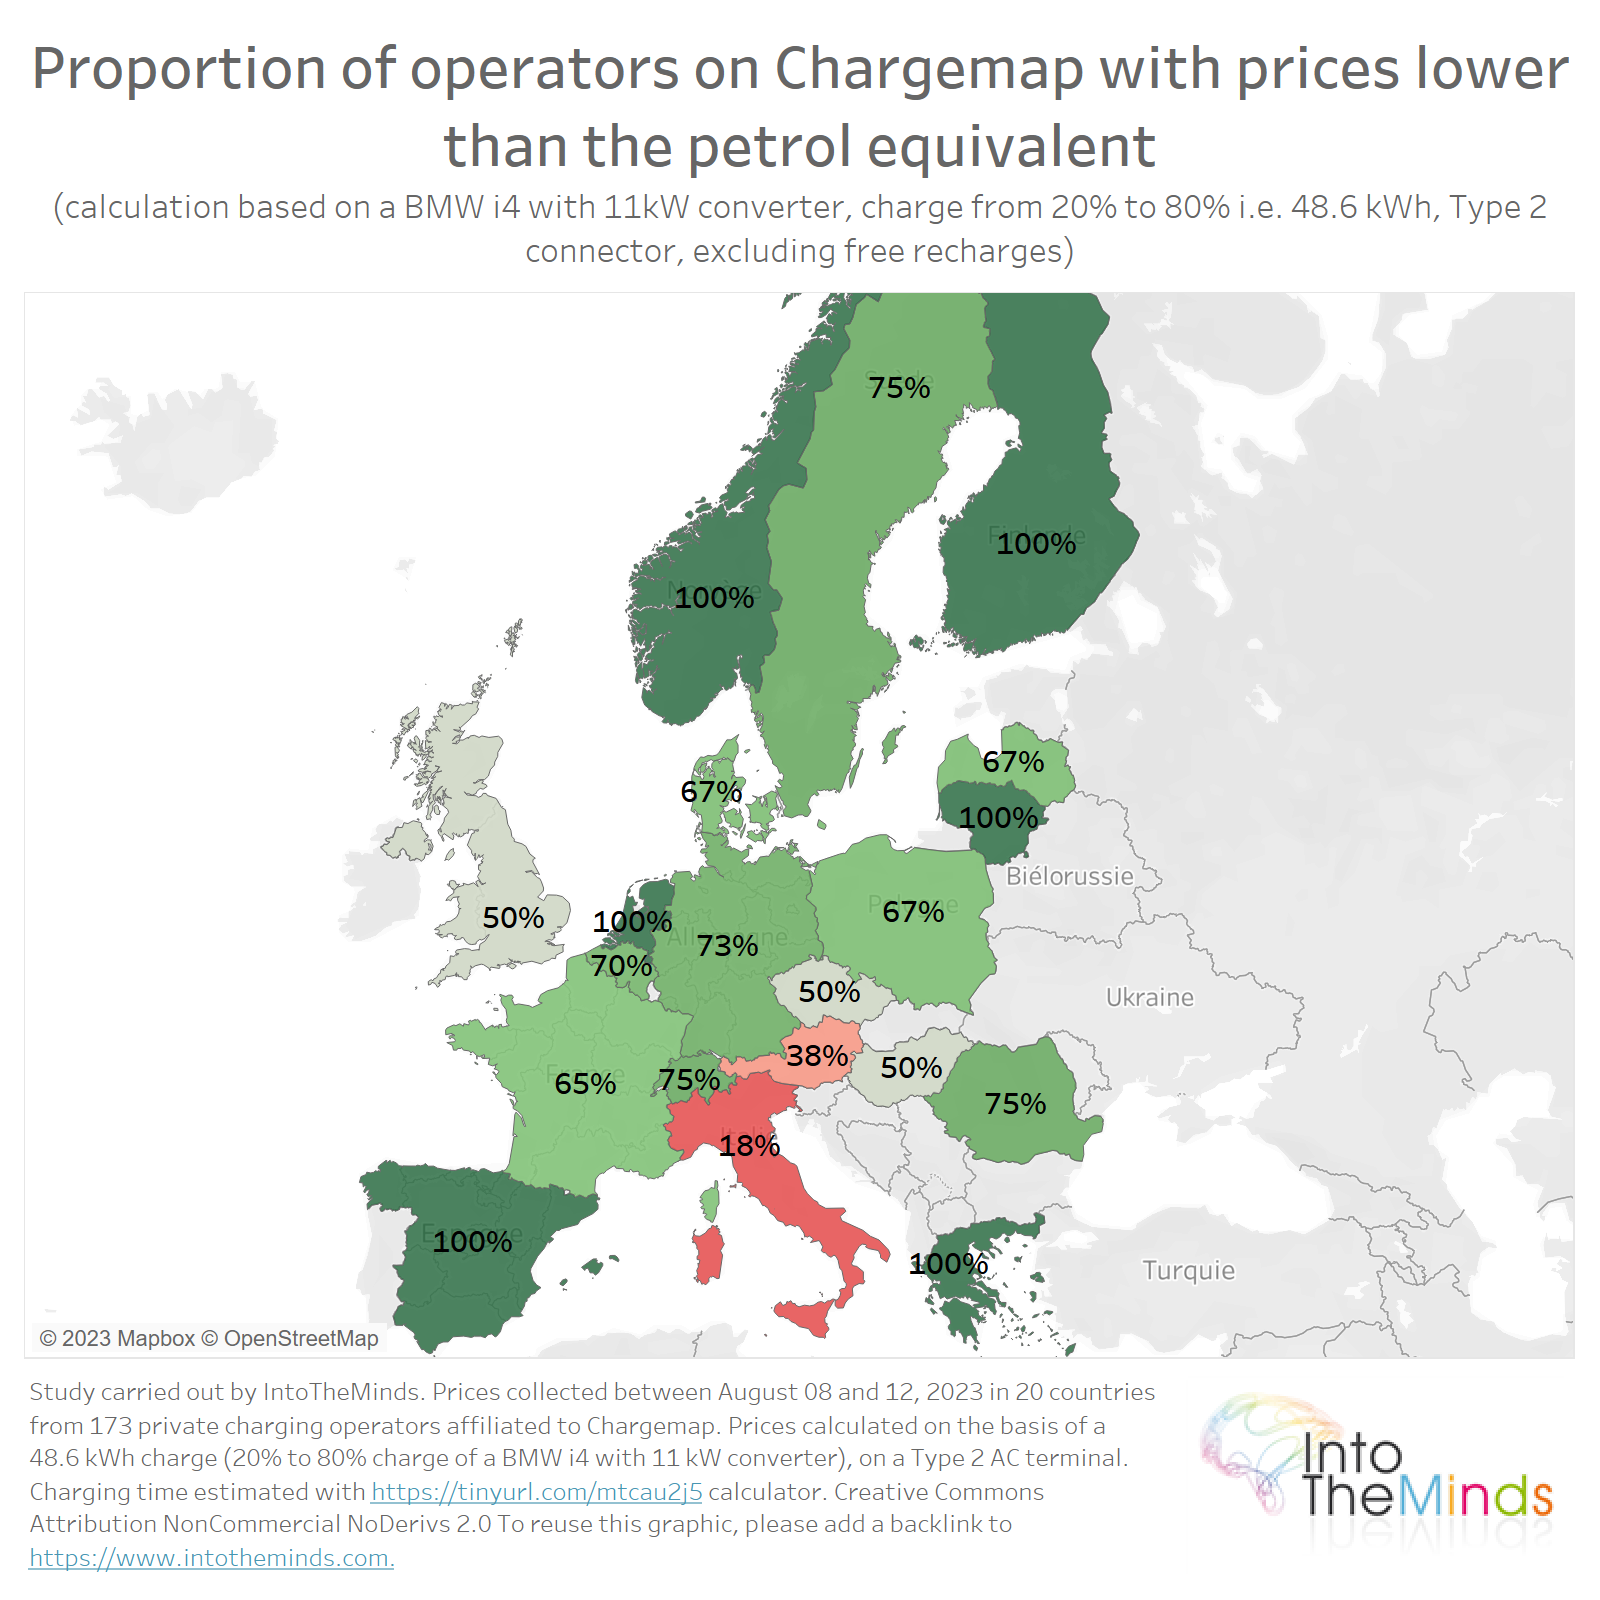 Proportion of operators on Chargemap with prices lower than the petrol equivalent (calculation based on a BMW i4 with 11kW converter, charge from 20% to 80% i.e. 48.6 kWh, Type 2 connector, excluding free recharges)